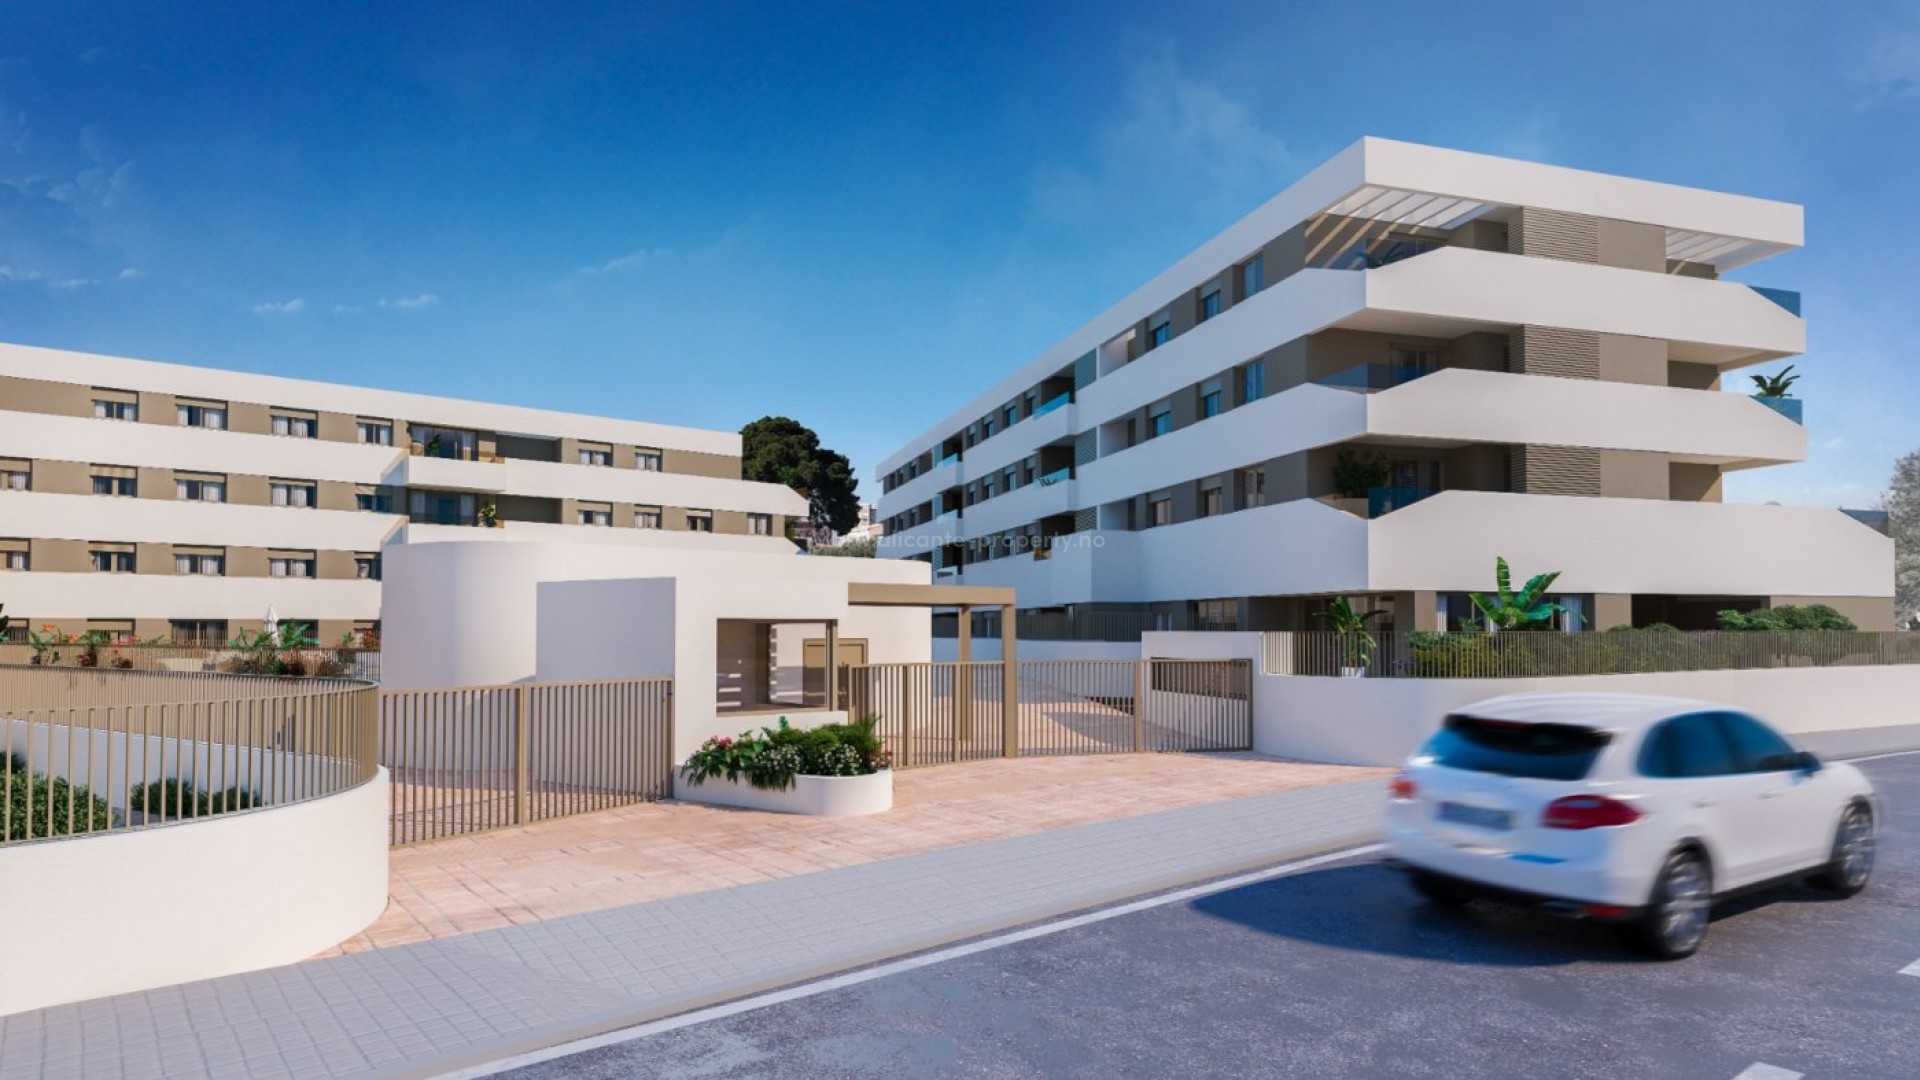 Buying flat in San Juan Alicante? Exclusive apartments with 1/2/3/4 bedrooms, 2 bathrooms. Fantastic common areas with swimming pool, gym and social club